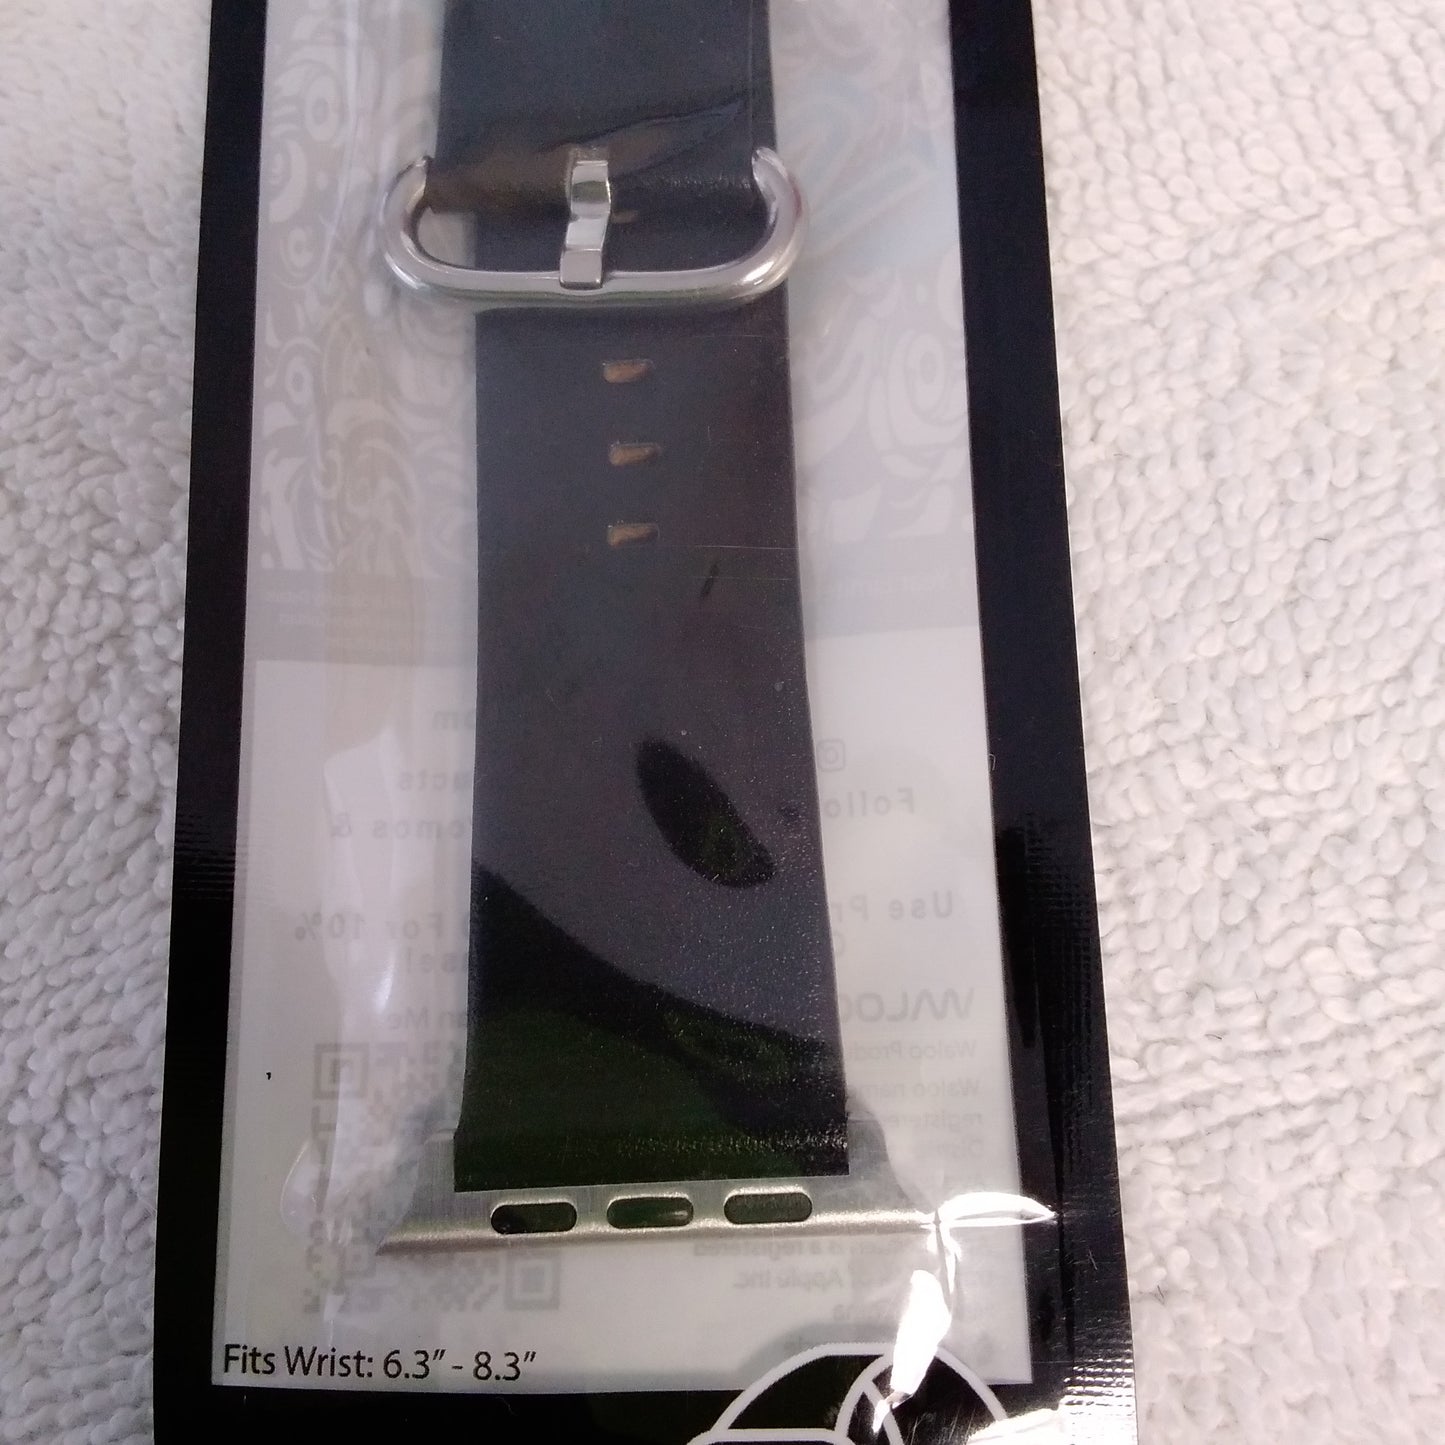 NWT - Waloo Apple Watch Black Leather Grain Replacement Band 42/44mm